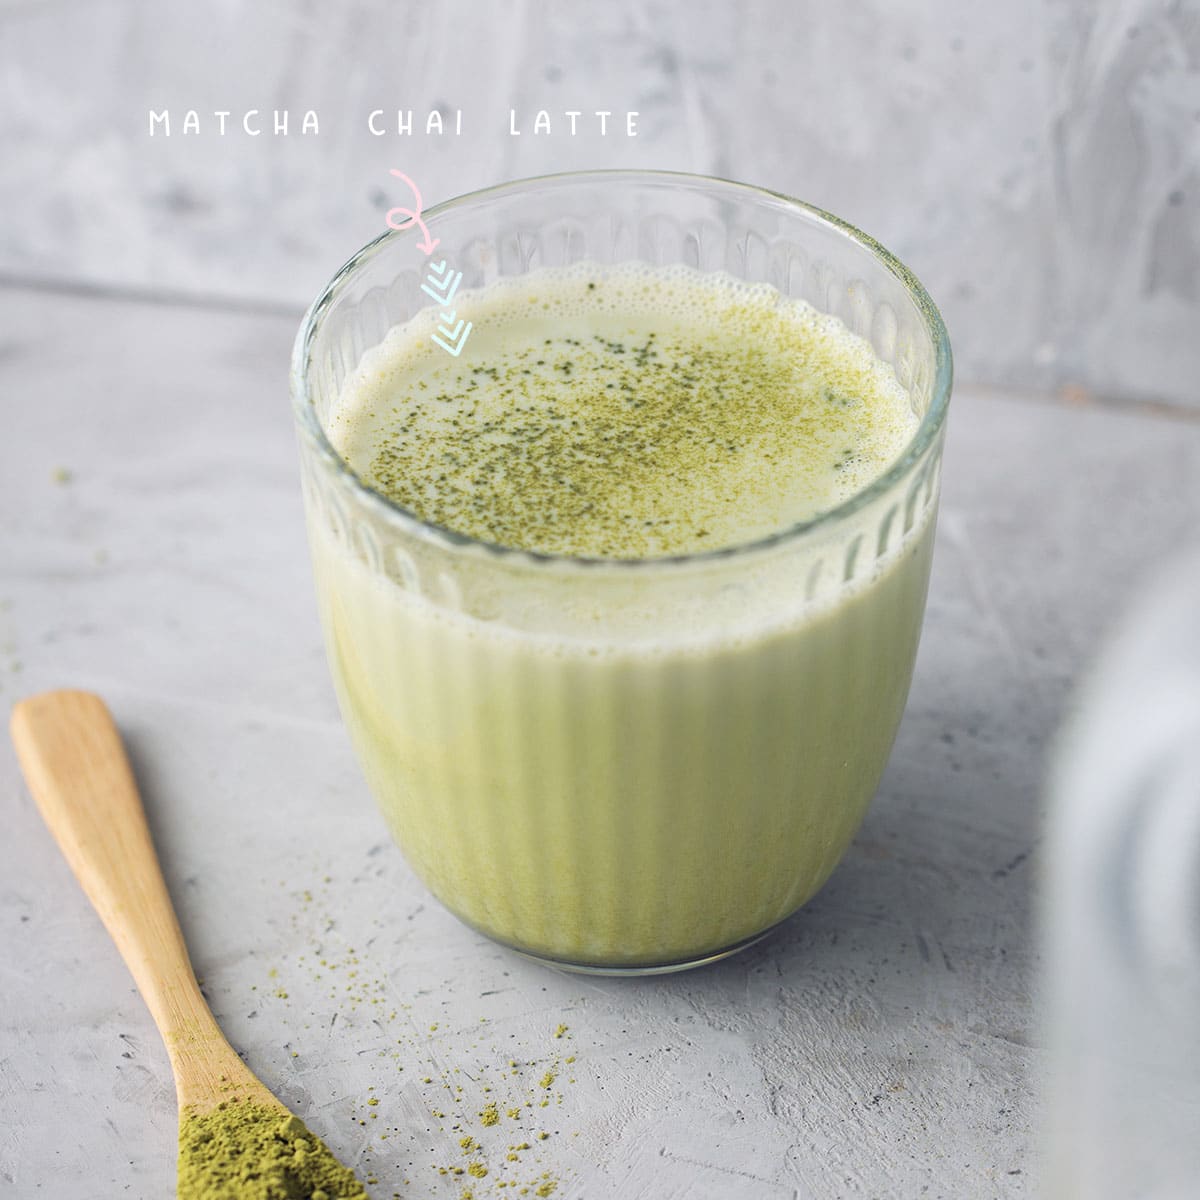 This matcha chai latte is the perfect balance of cozy and refreshing, and I guarantee that it will become your new favorite wintertime drink! I love this recipe because it uses almond milk instead of dairy, making it lighter and easier to digest.